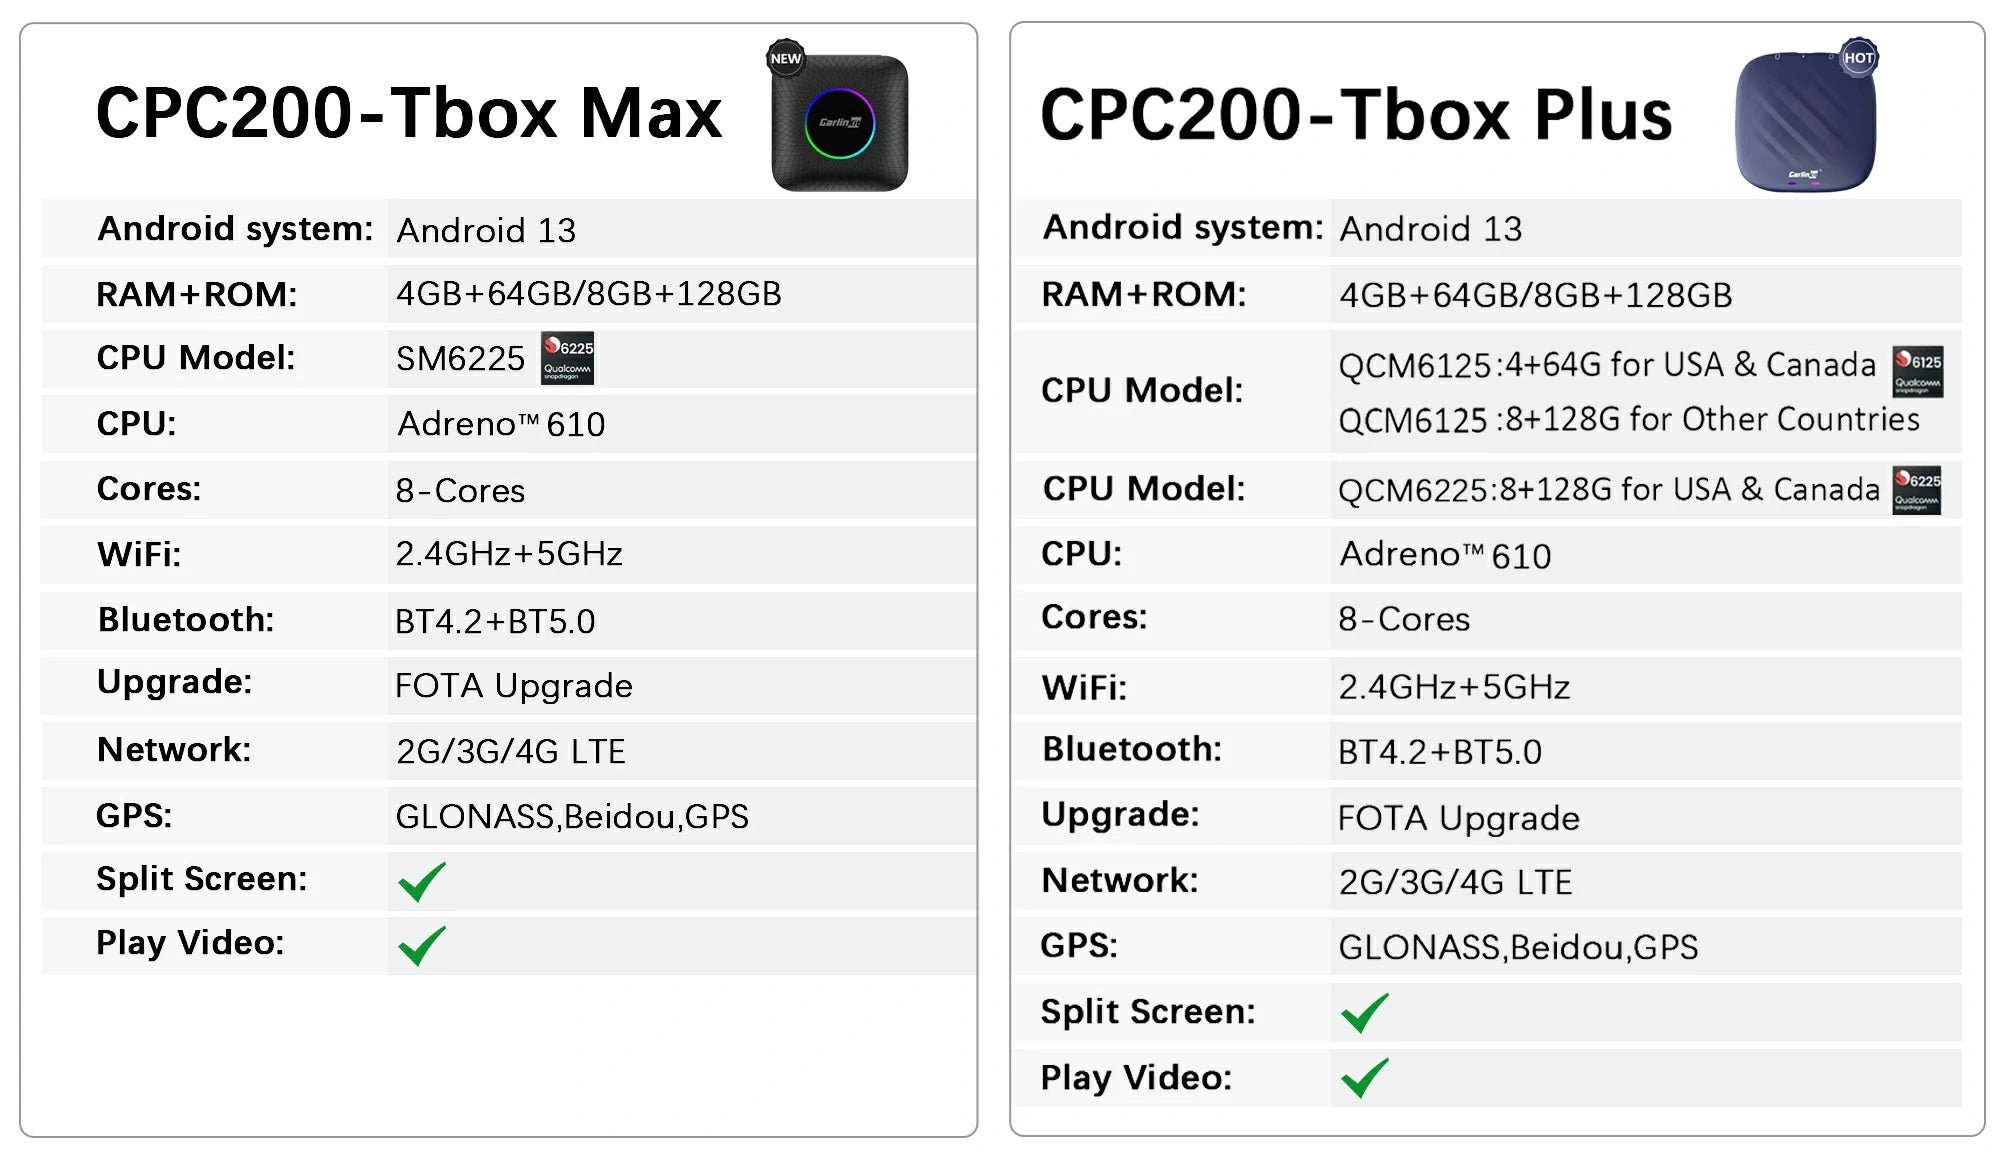  The difference between the Carlinkit Tbox Max and Tbox Plus